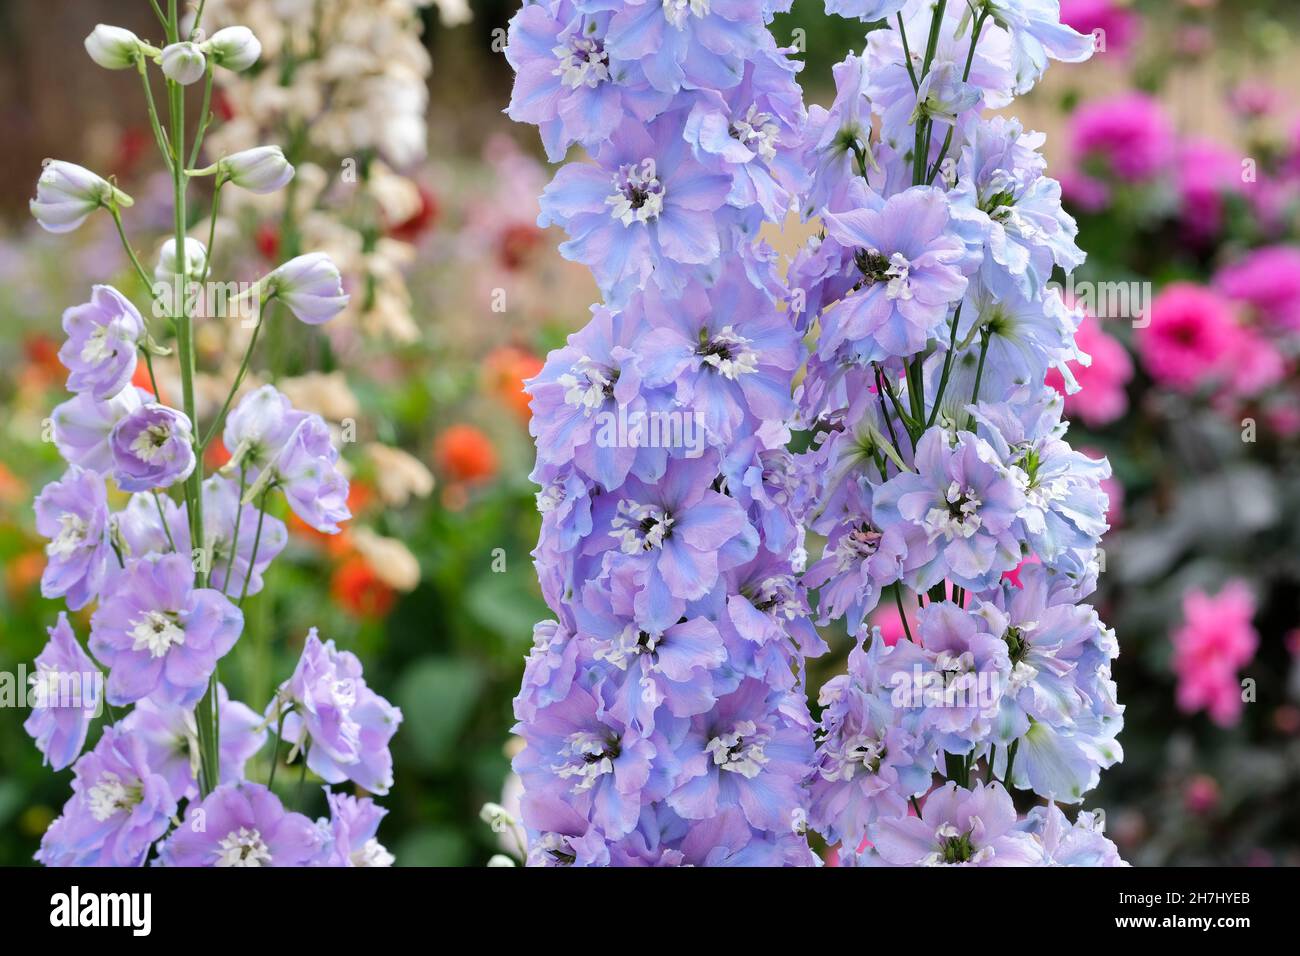 Delphinium 'Spindrift'. Candle Larkspur, Candle Larkspur 'Spindrift', Candle Delphinium 'Spindrift'. Semi-double pale lilac flowers Stock Photo